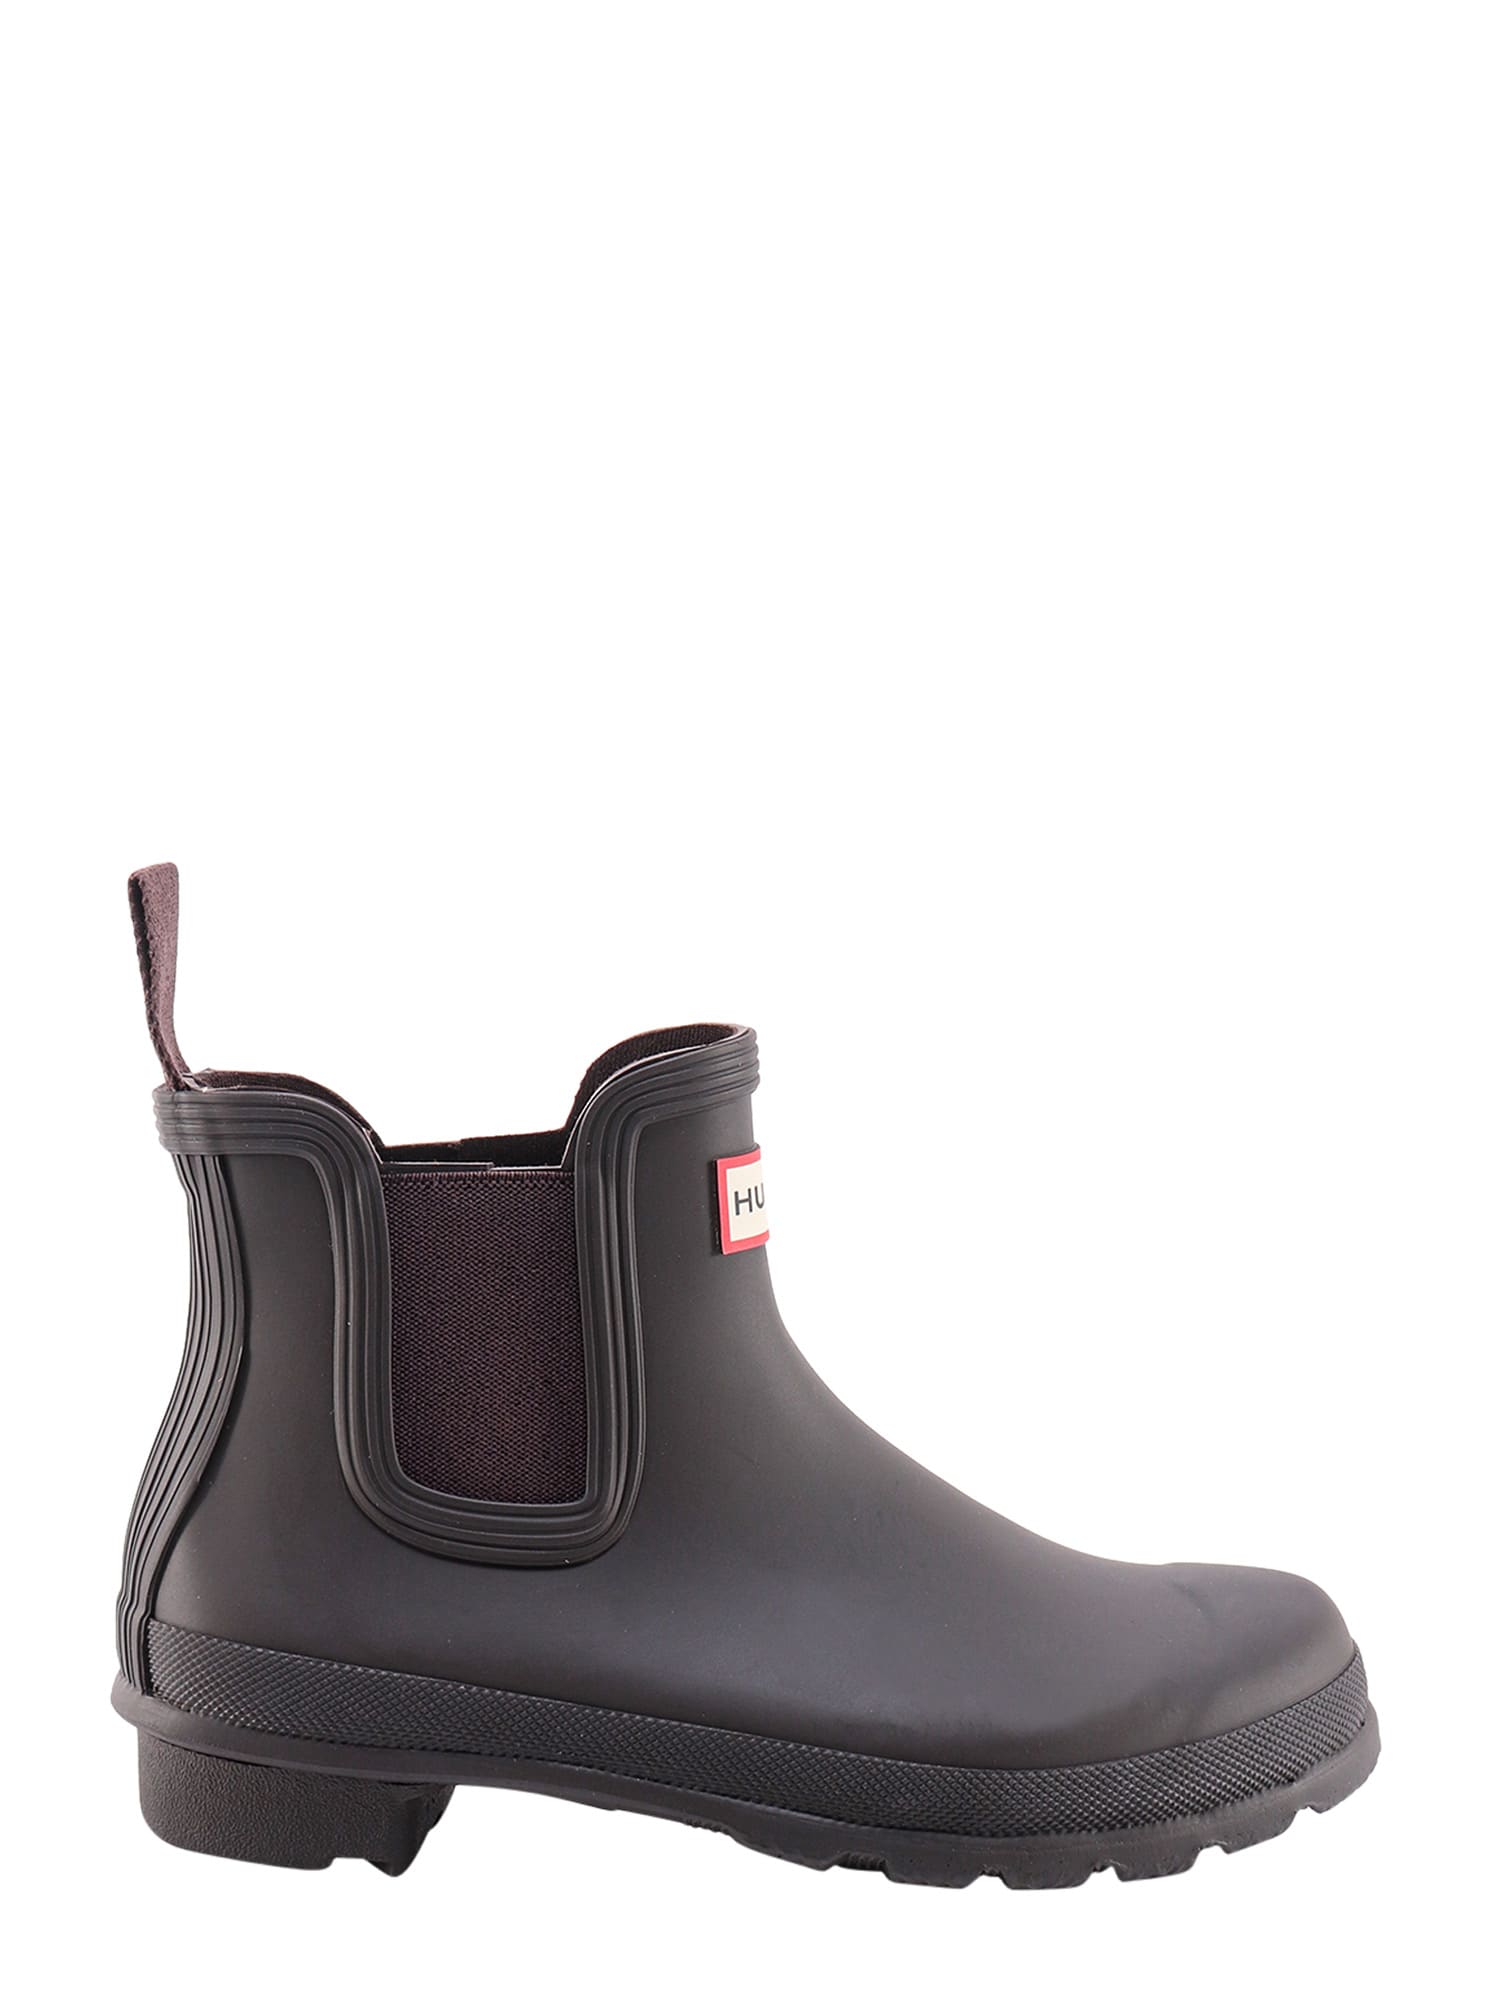 Hunter Ankle Boots